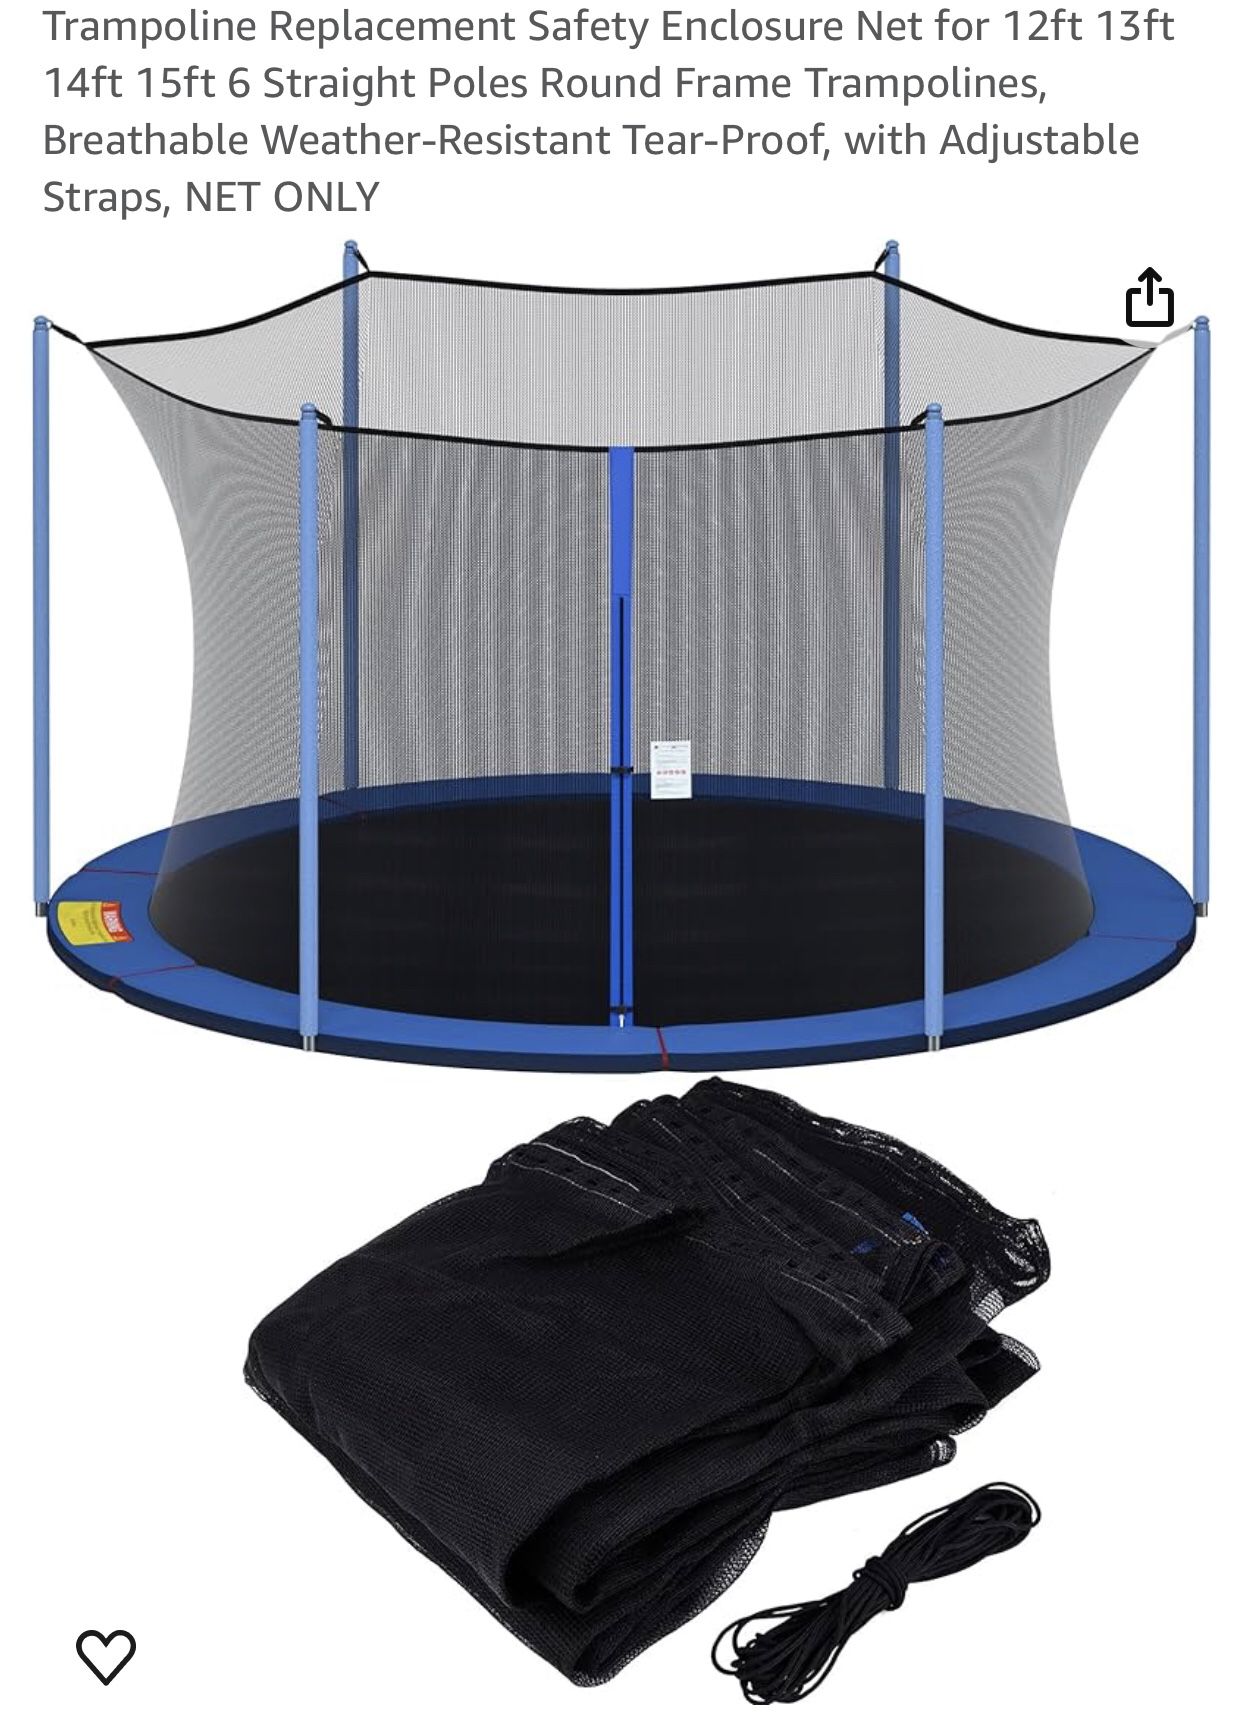 Trampoline Replacement Safety Enclosure Net 12 Ft. 